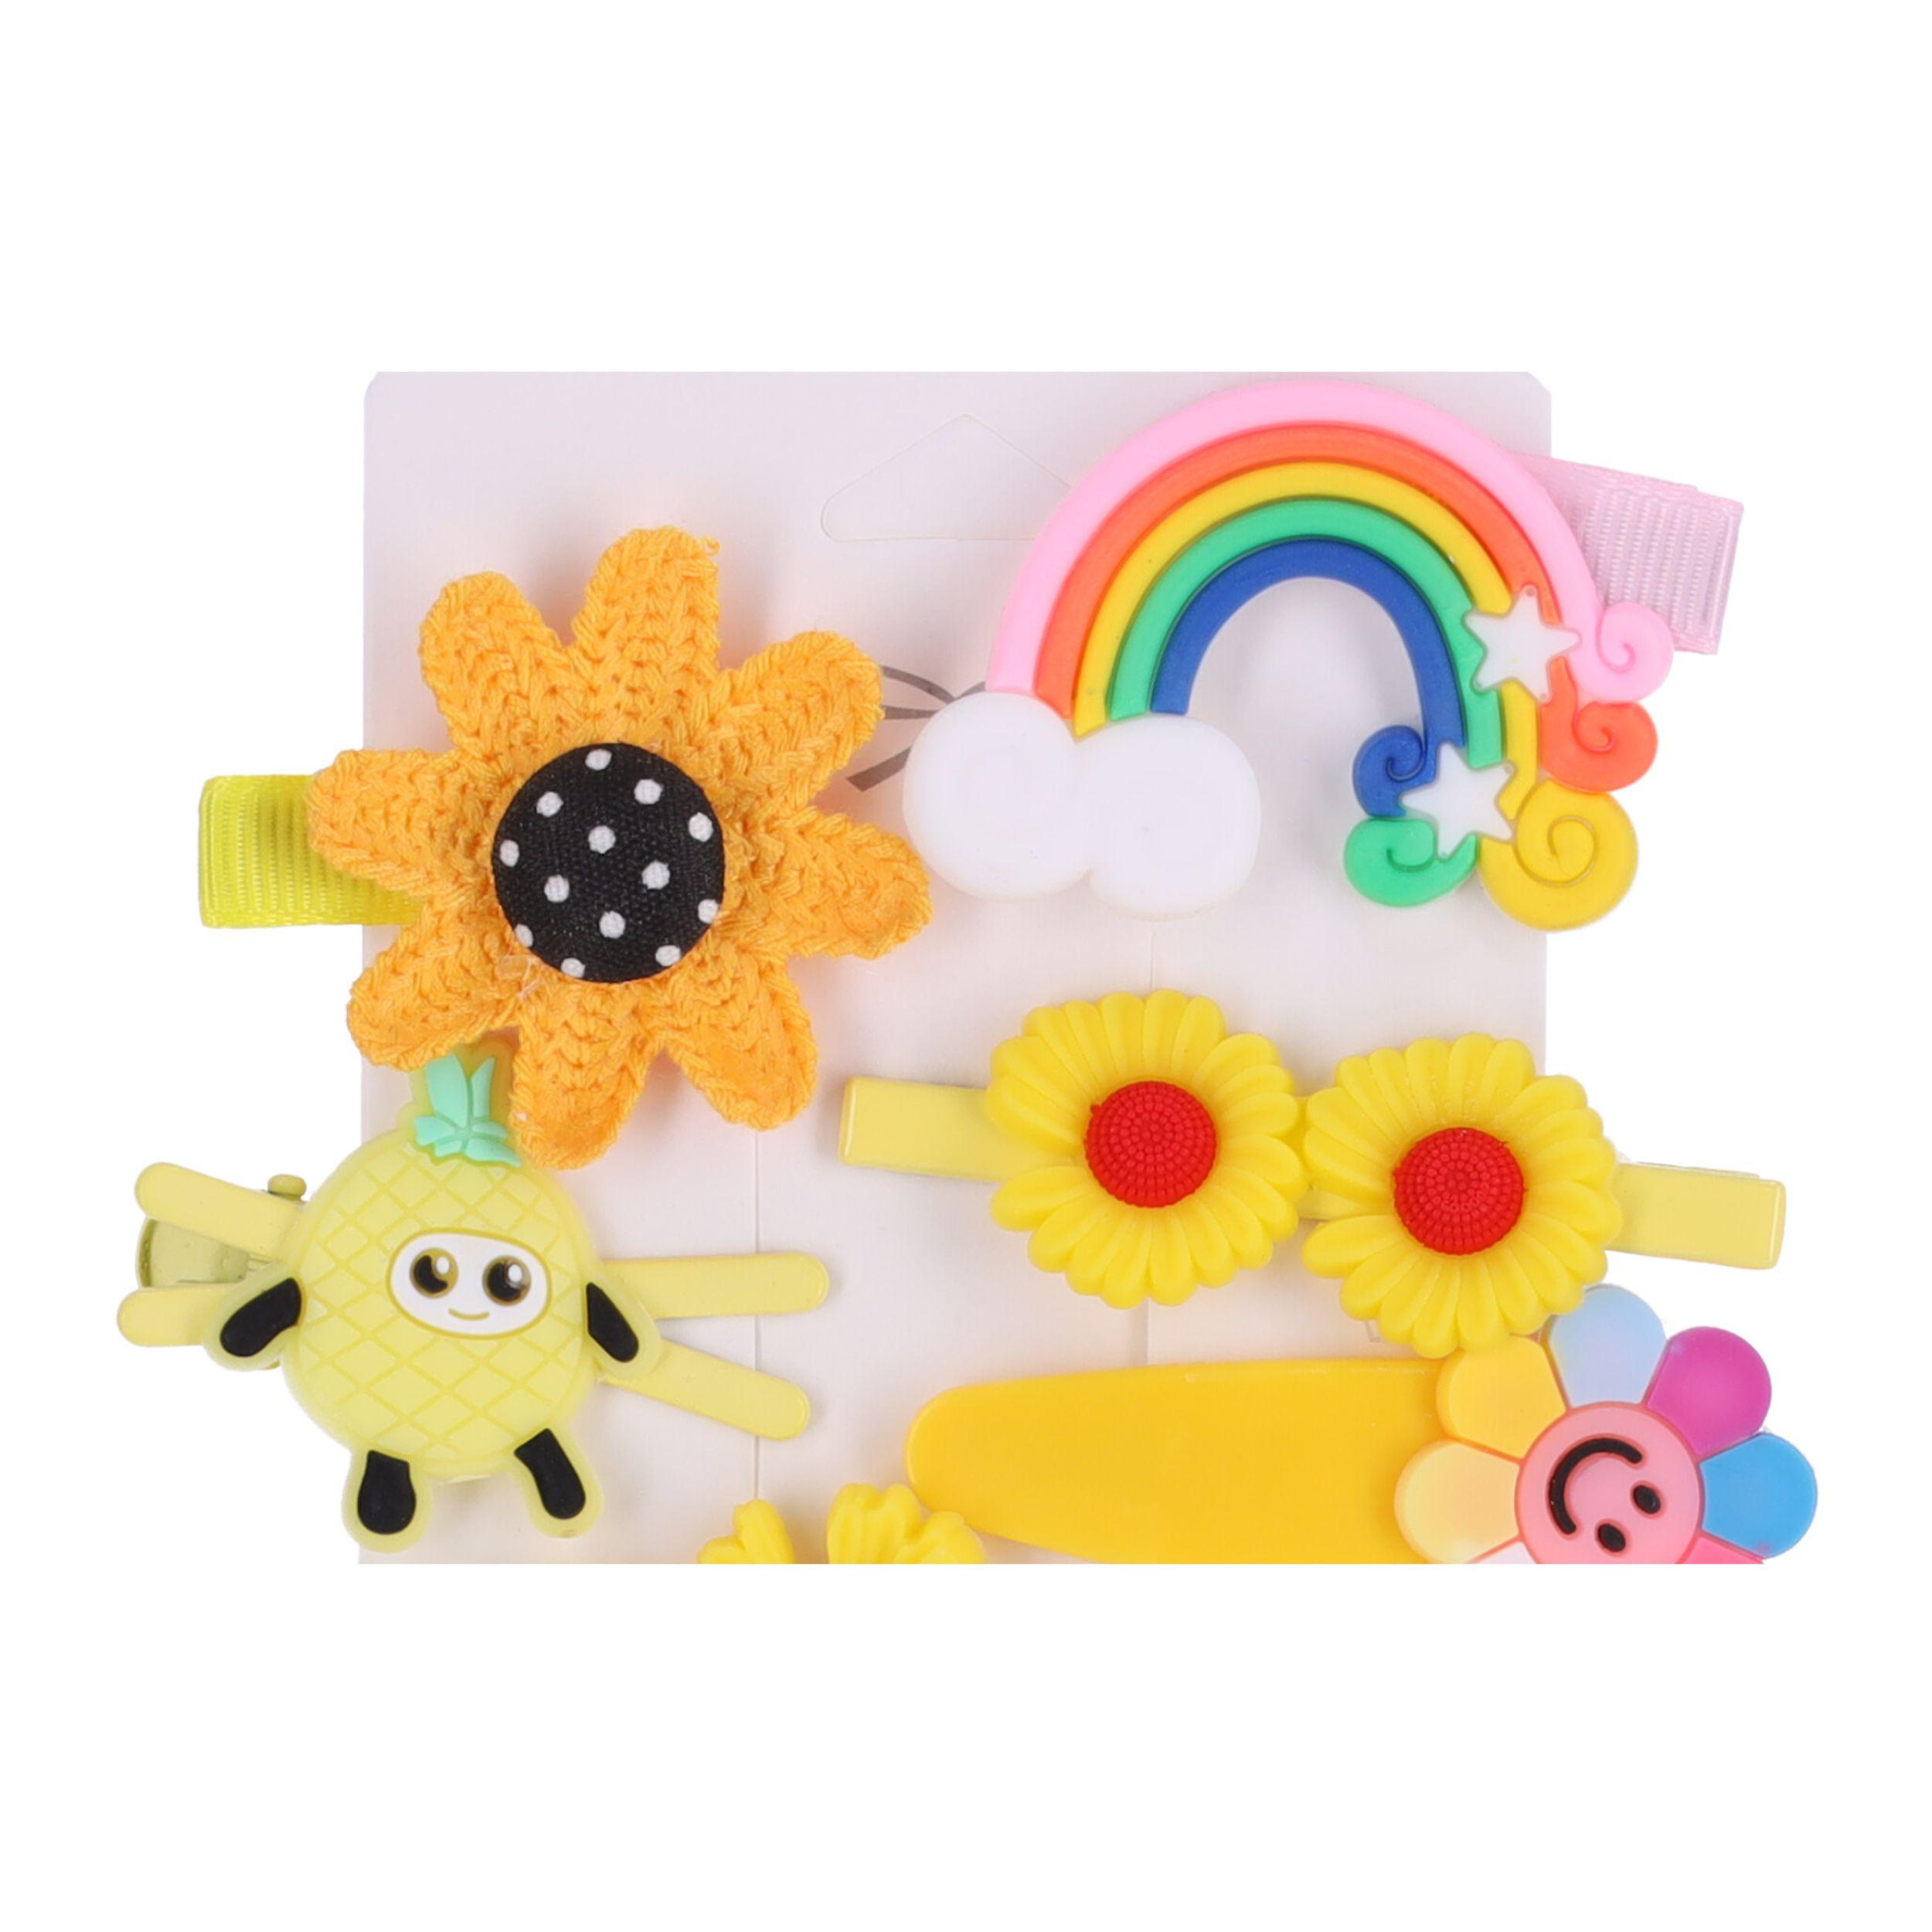 Adorable set of hair clips for a girl - 14pcs, type III